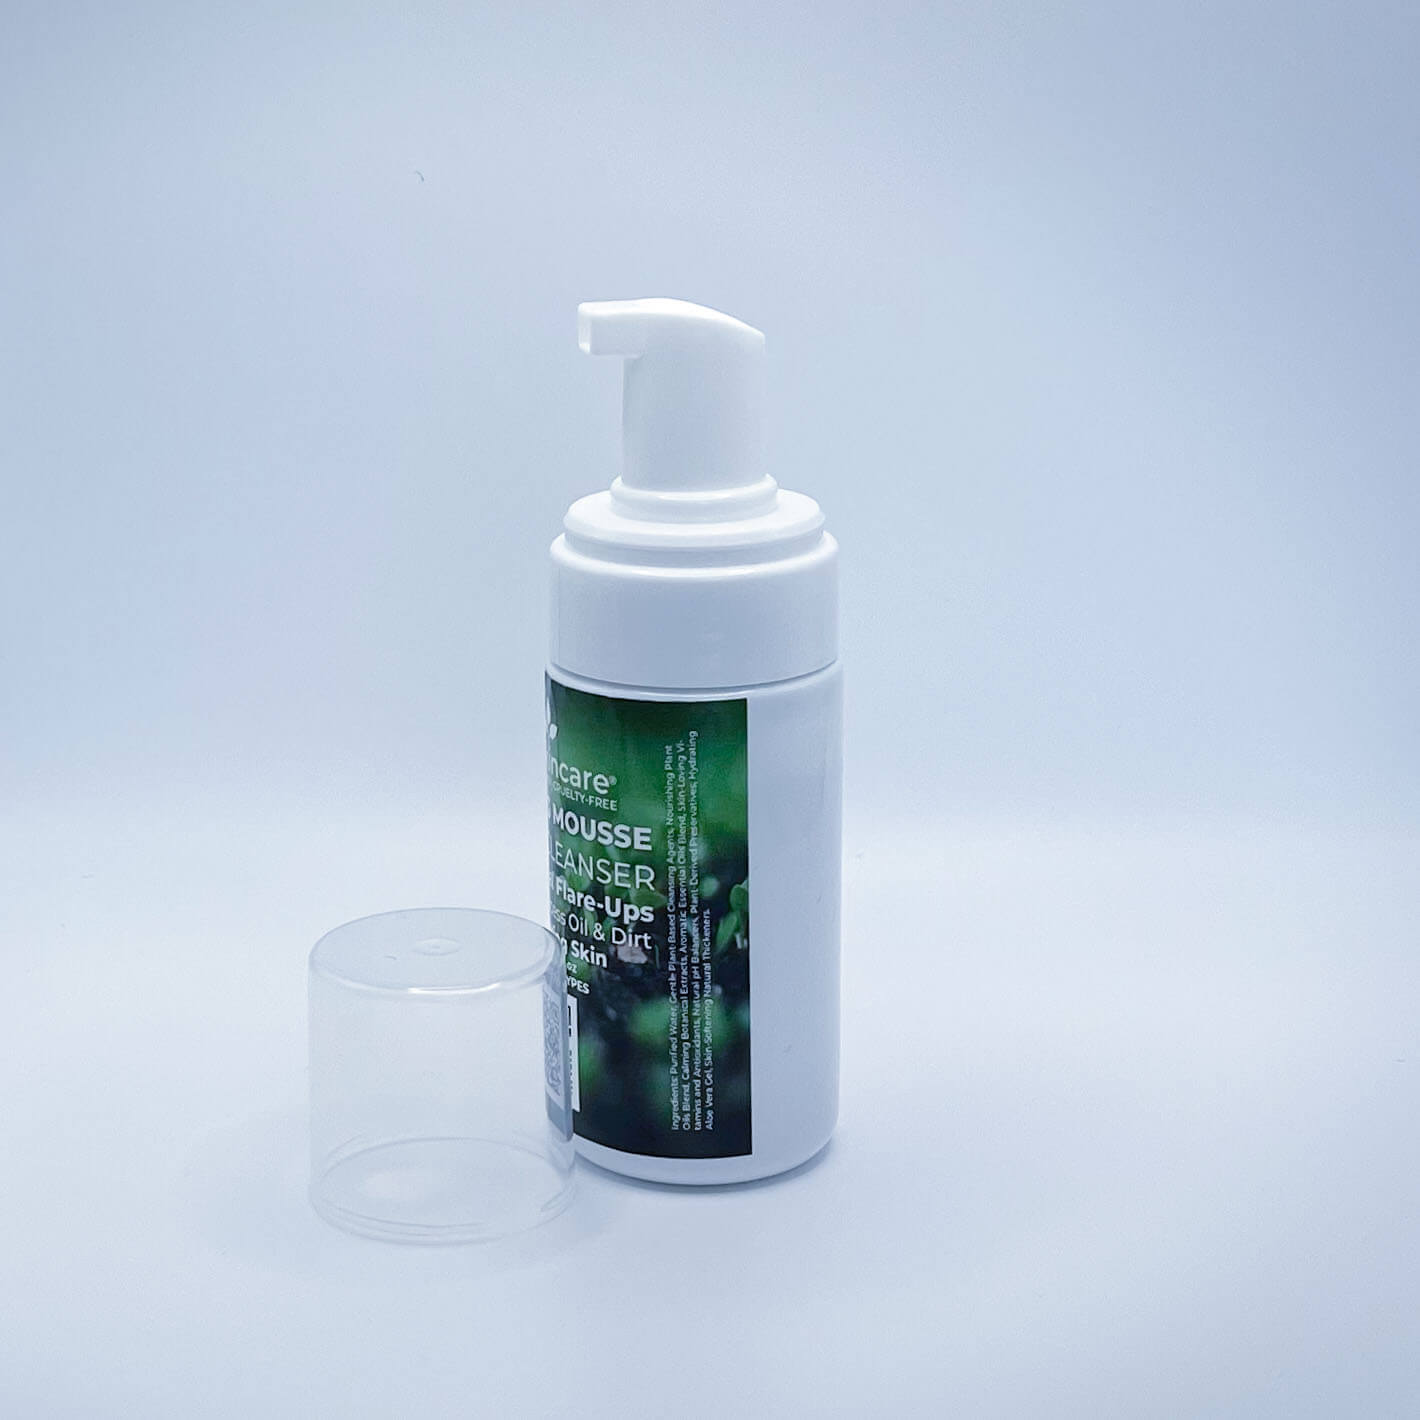 Fate Skincare's Foaming Mousse Facial Cleanser in a 3.3 ounce white pump bottle with a clear top, showcasing Fate Skincare's iconic logo with a tree sprouting out of the 'I', symbolizing the brand's connection to nature.